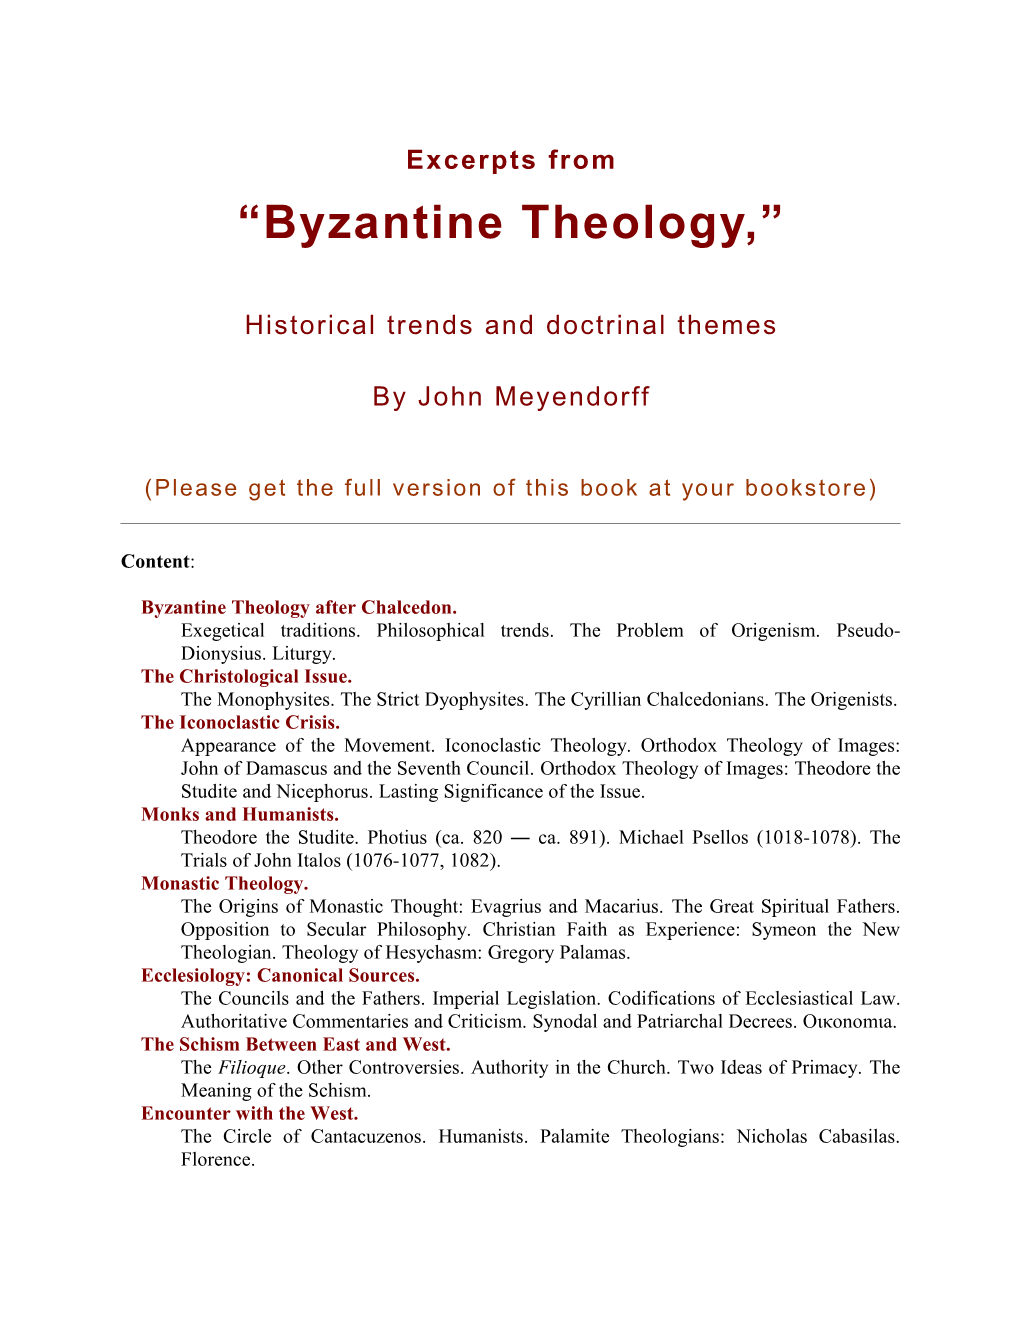 Historical Trends and Doctrinal Themes